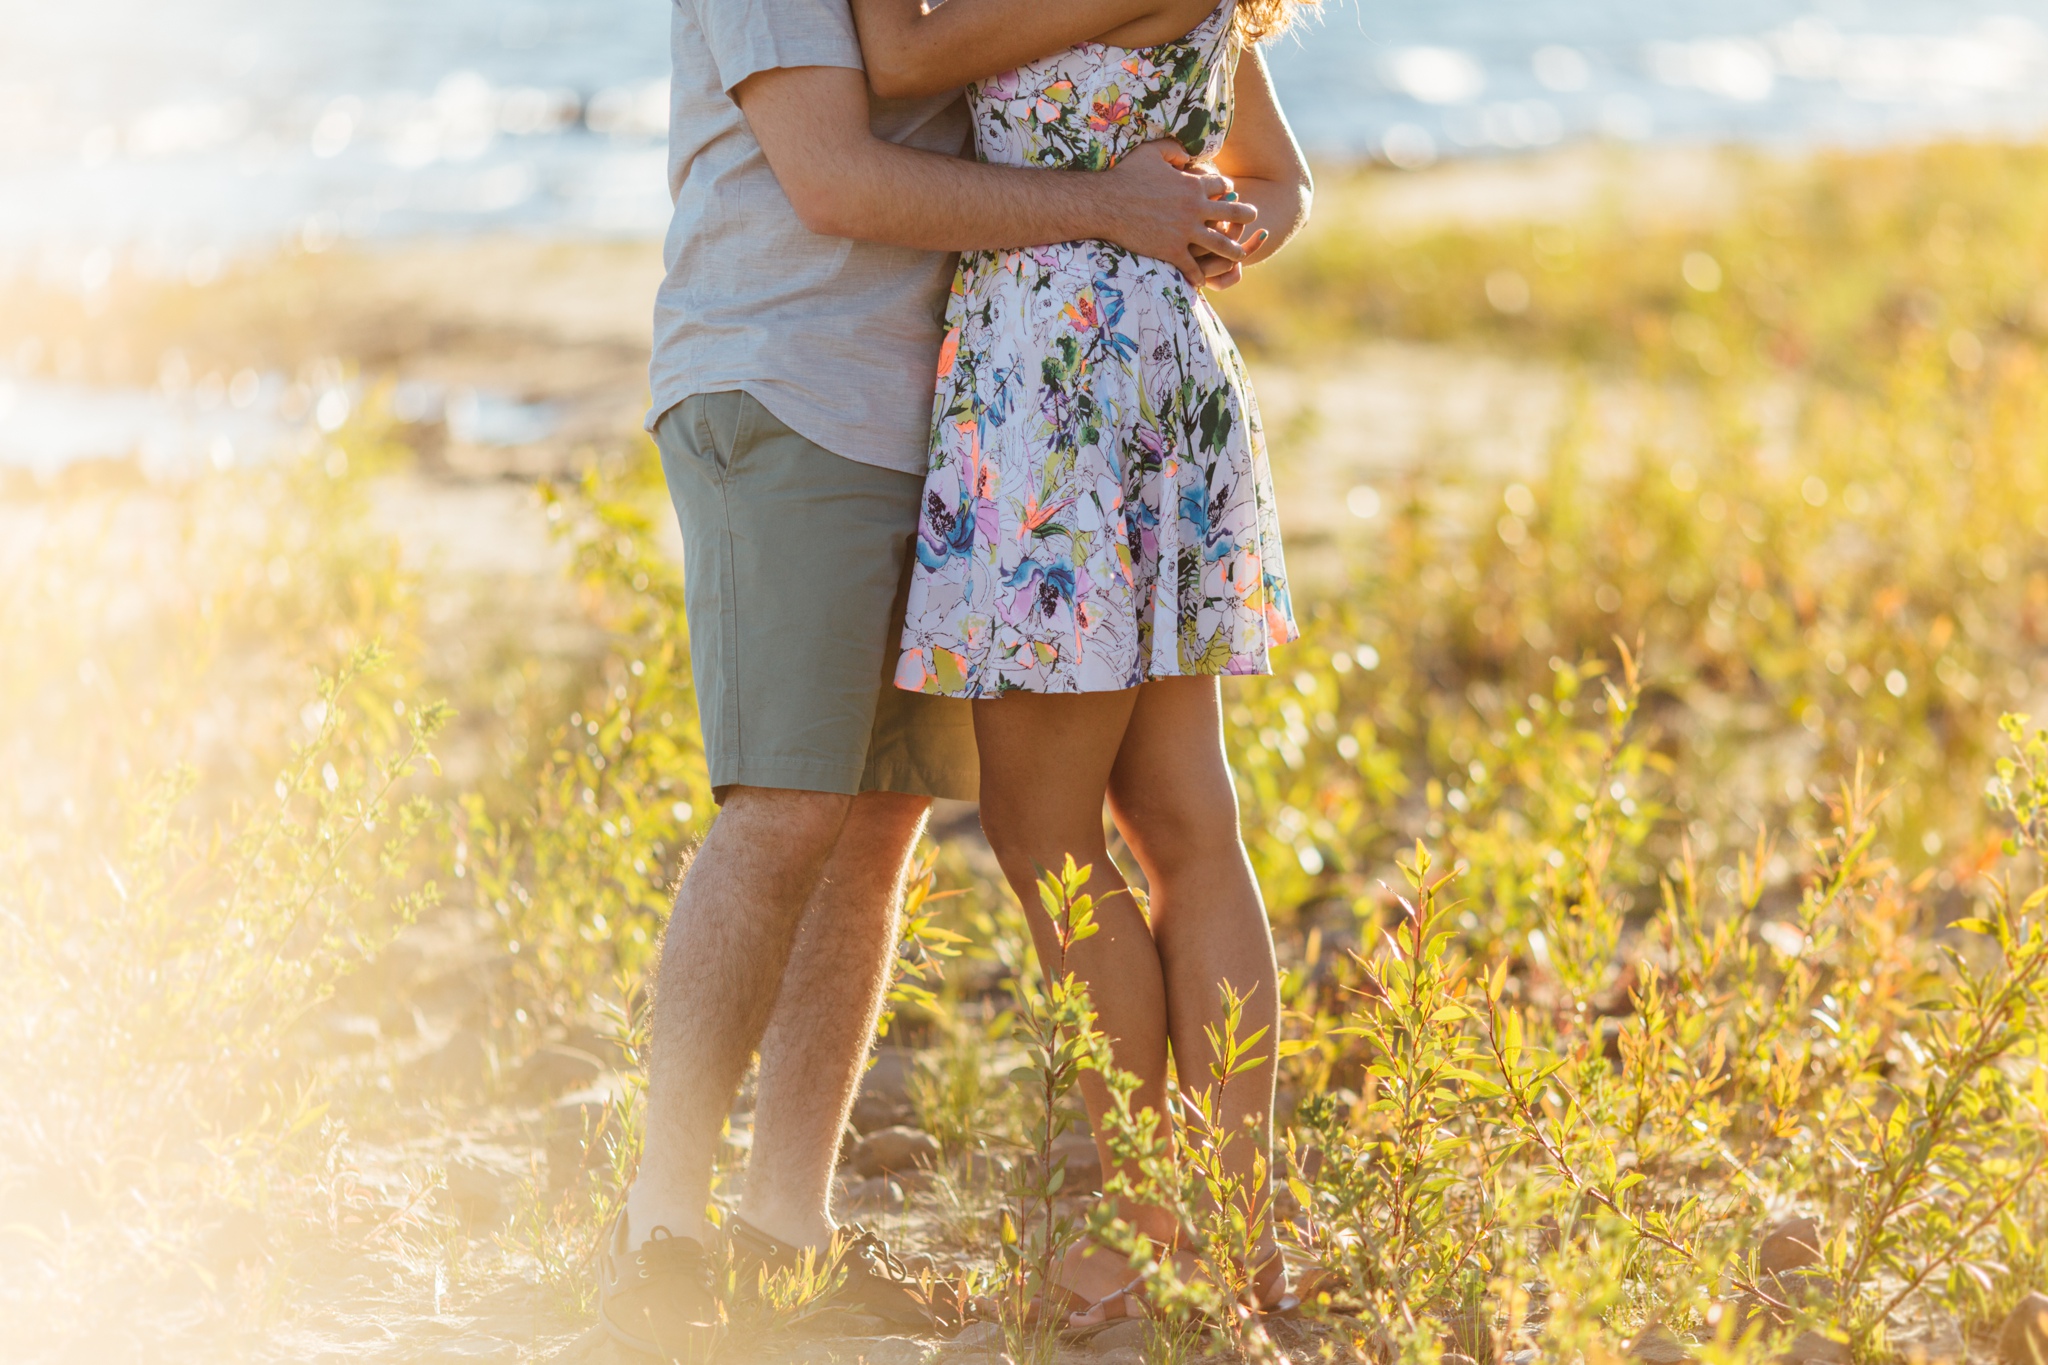 thedelauras_ostaraphotography_laketahoeengagement_laketahoeweddingphotograph_laketahoe_photographer_026